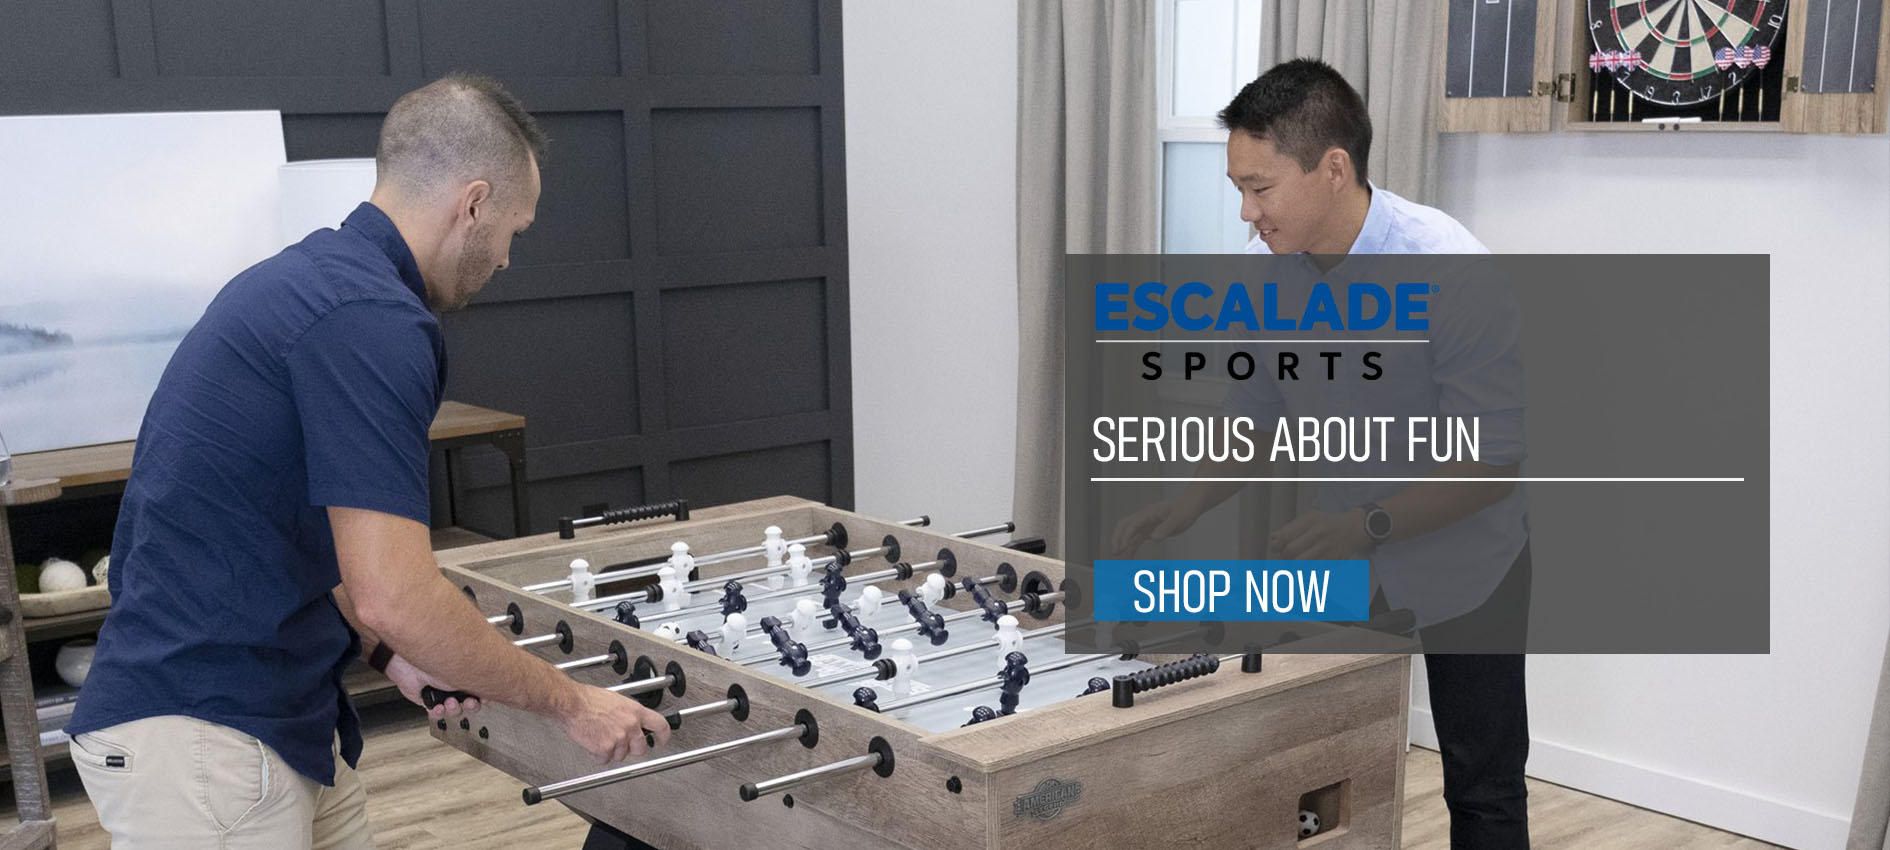 Escalade - High Performance Sports Equipment and Accessories 